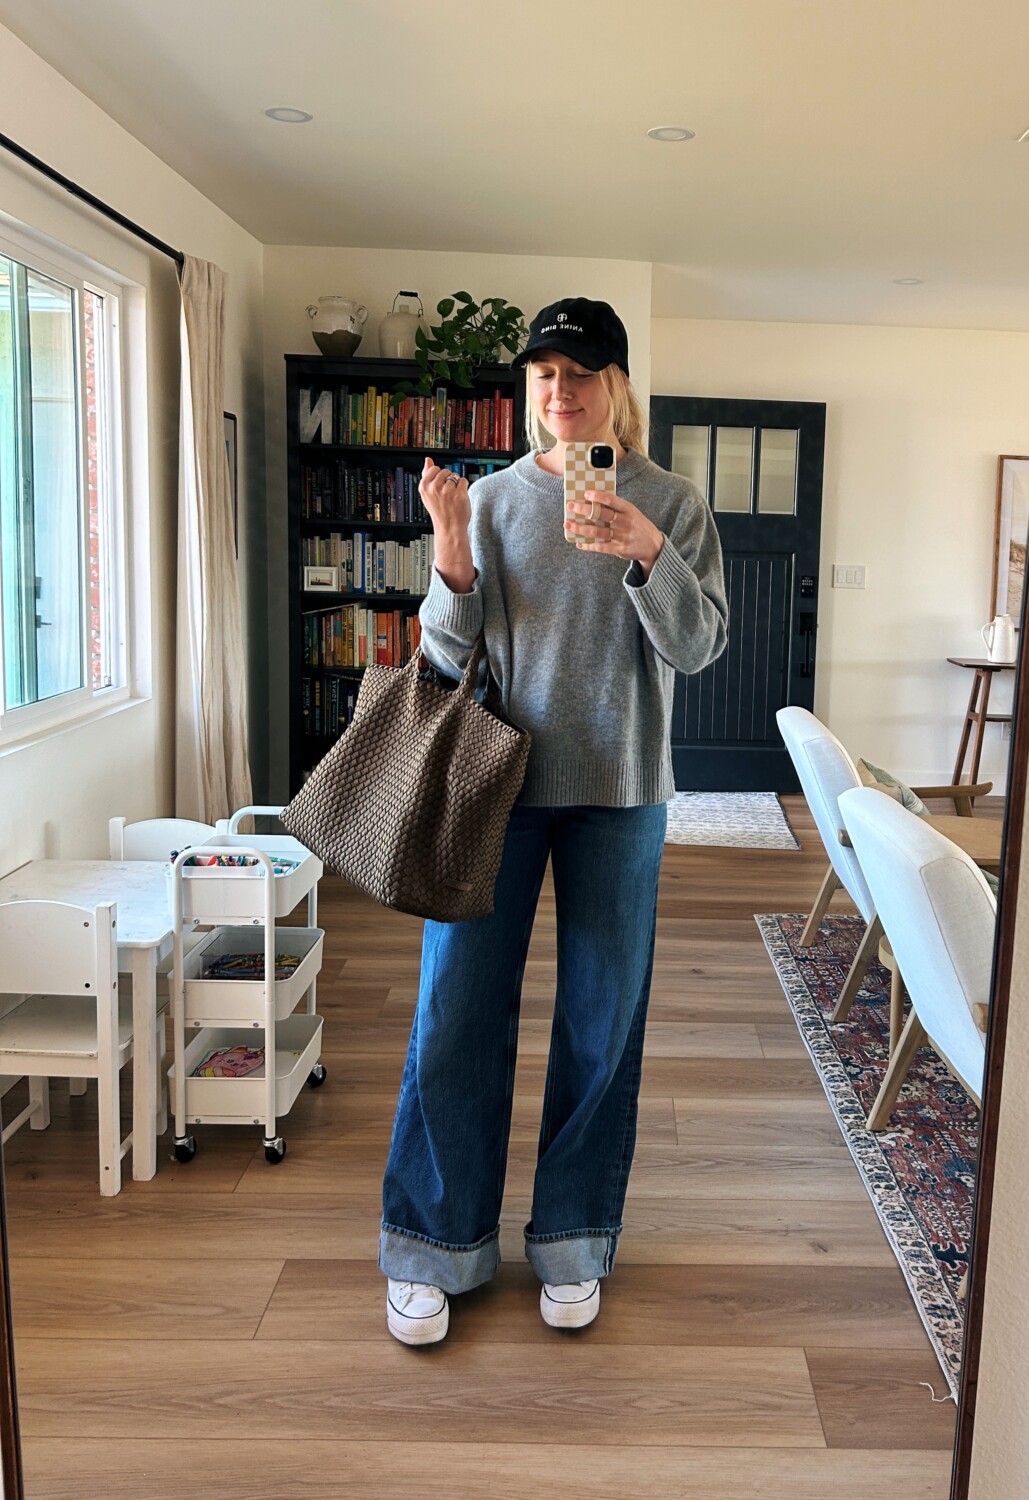 Ruth Nuss wearing a gray Quince cashmere sweater and a brown tote bag